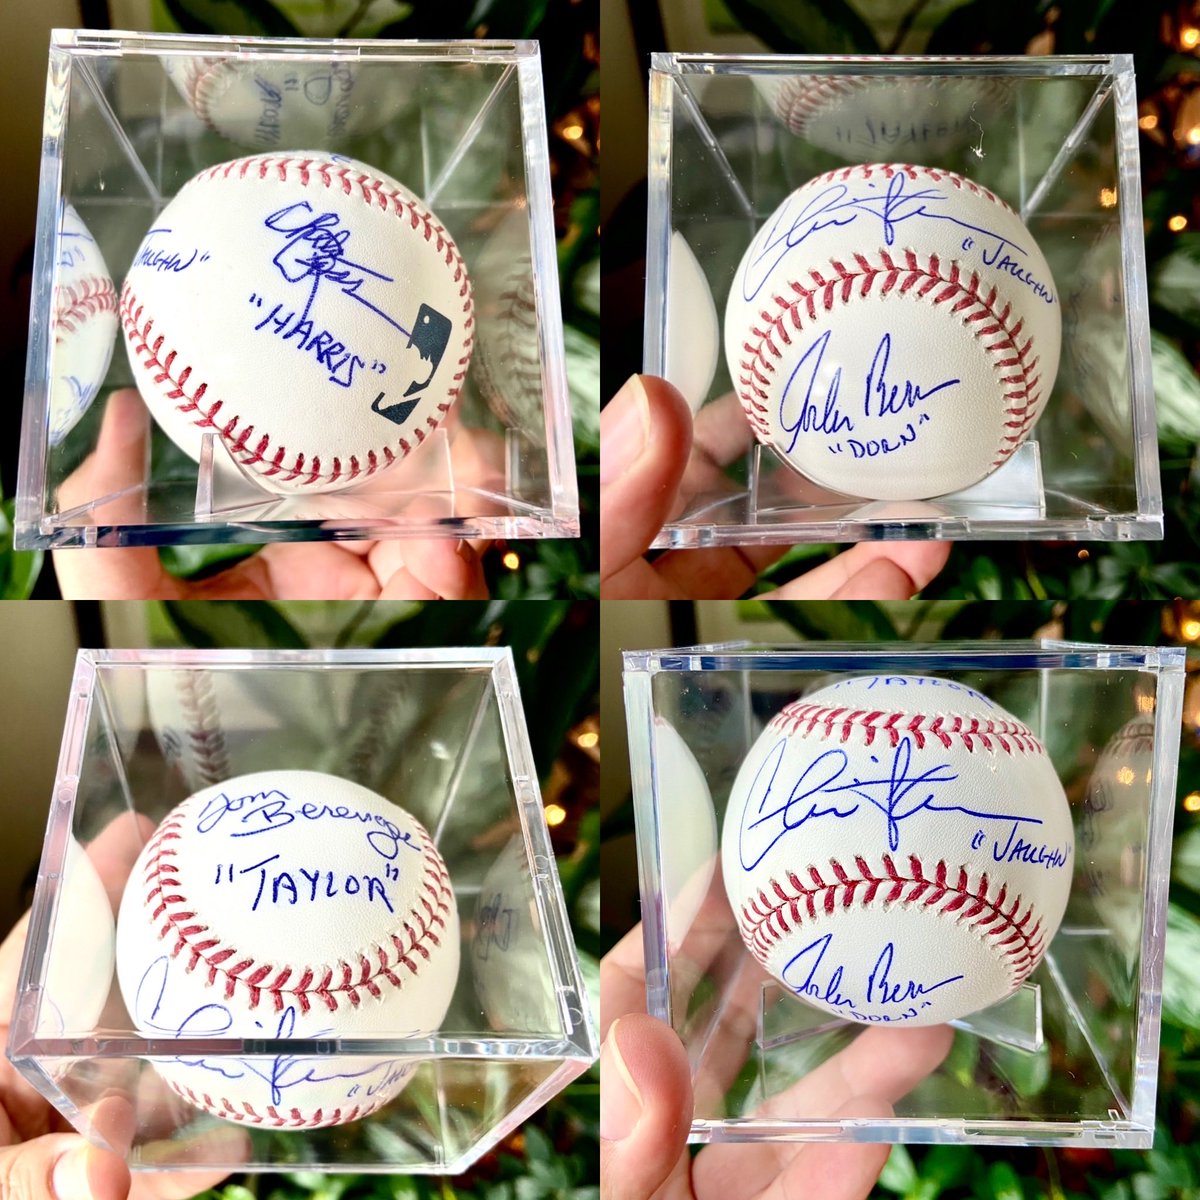 Since it’s the 35th anniversary of the movie #MajorLeague, here’s a signed ball I got as a “from me to me” gift a few years ago. I loooove it. Wild thing, you make my heart sing! #baseball #baseballmovie ❤️⚾️💙